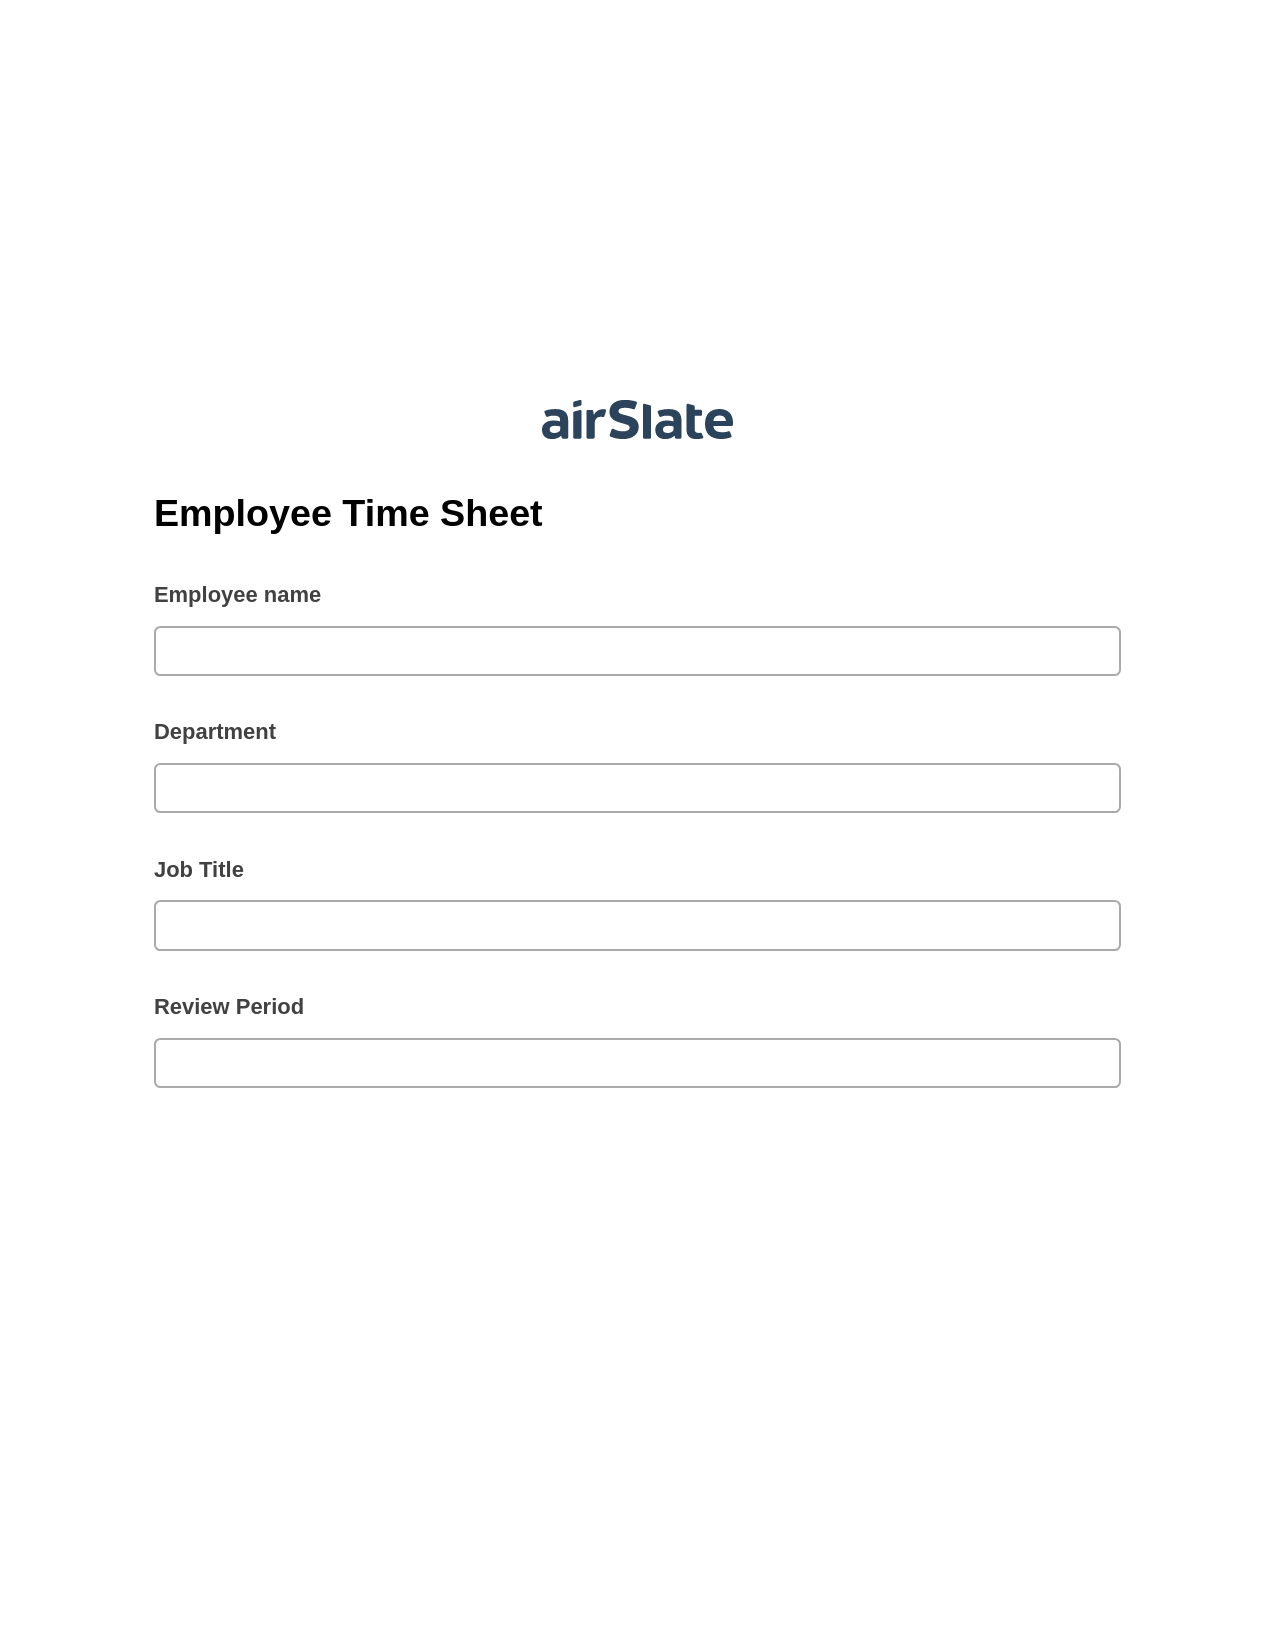 Multirole Employee Time Sheet Pre-fill Dropdowns from Excel Bot, Create slate addon, Archive to Dropbox Bot